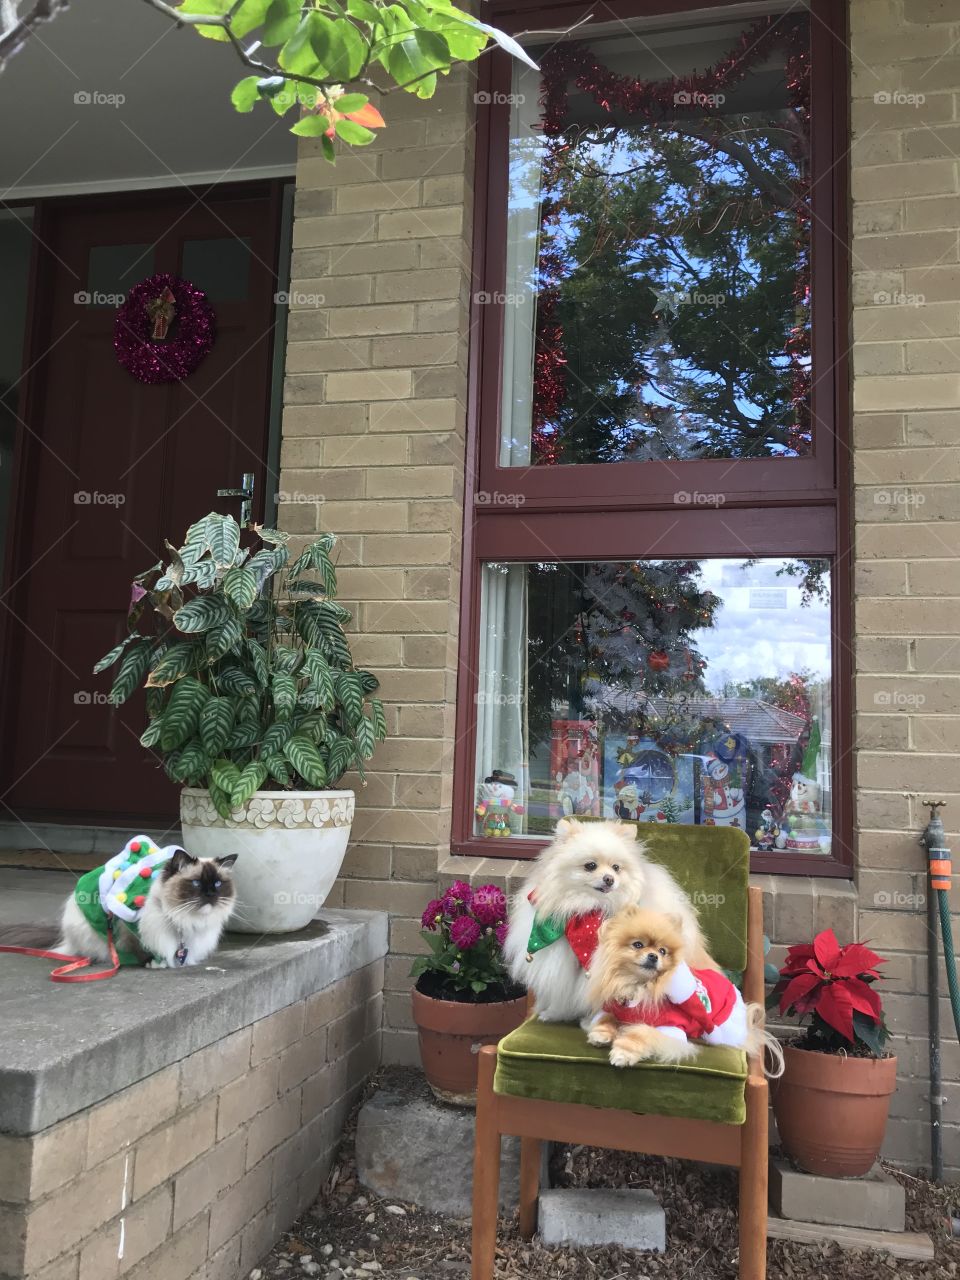 Cuties pets with the sign of window house decorating for Christmas in Cheltenham Melbourne Australia 